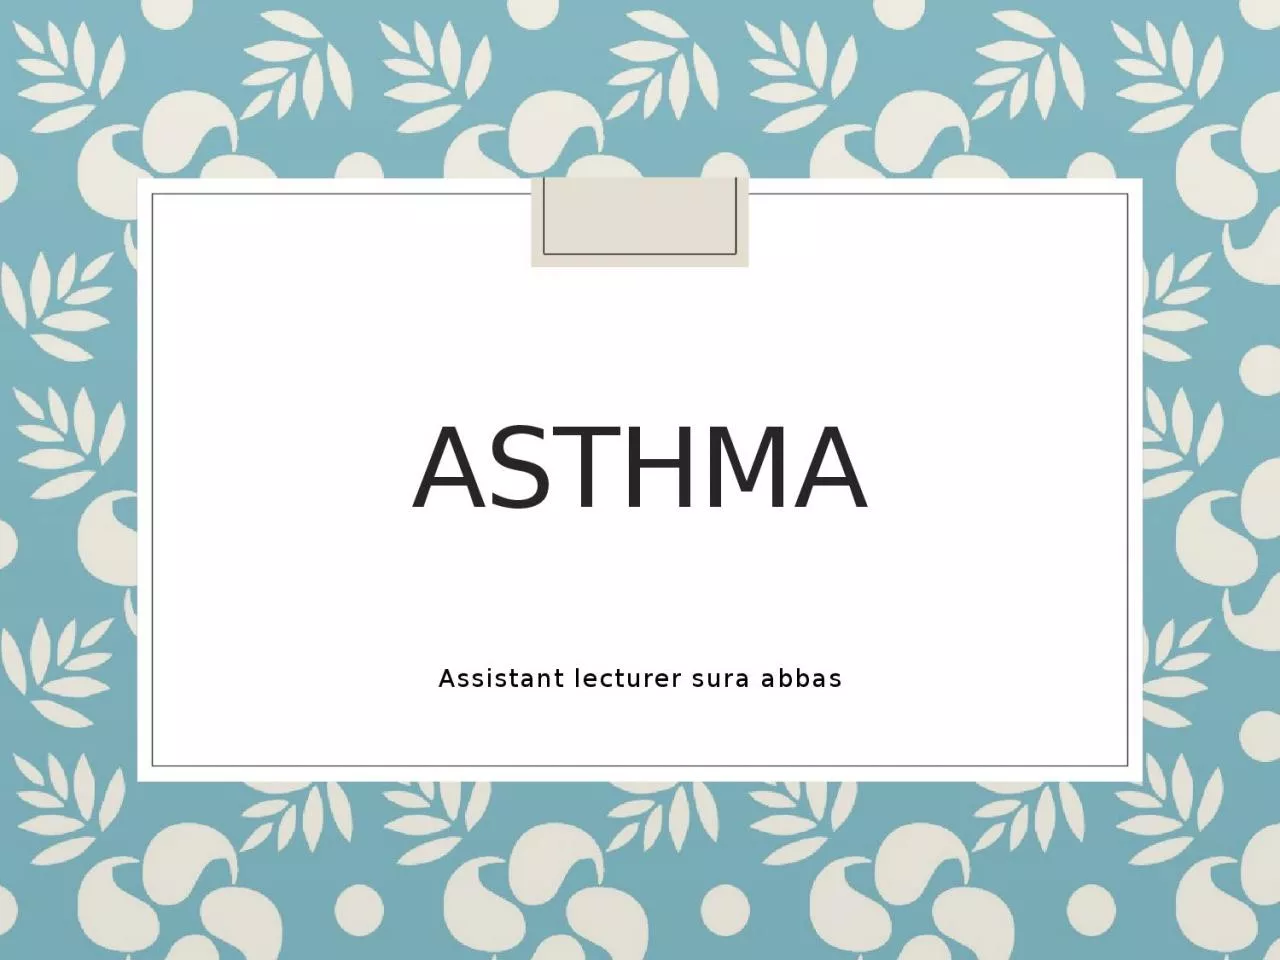 asthma Assistant lecturer sura abbas